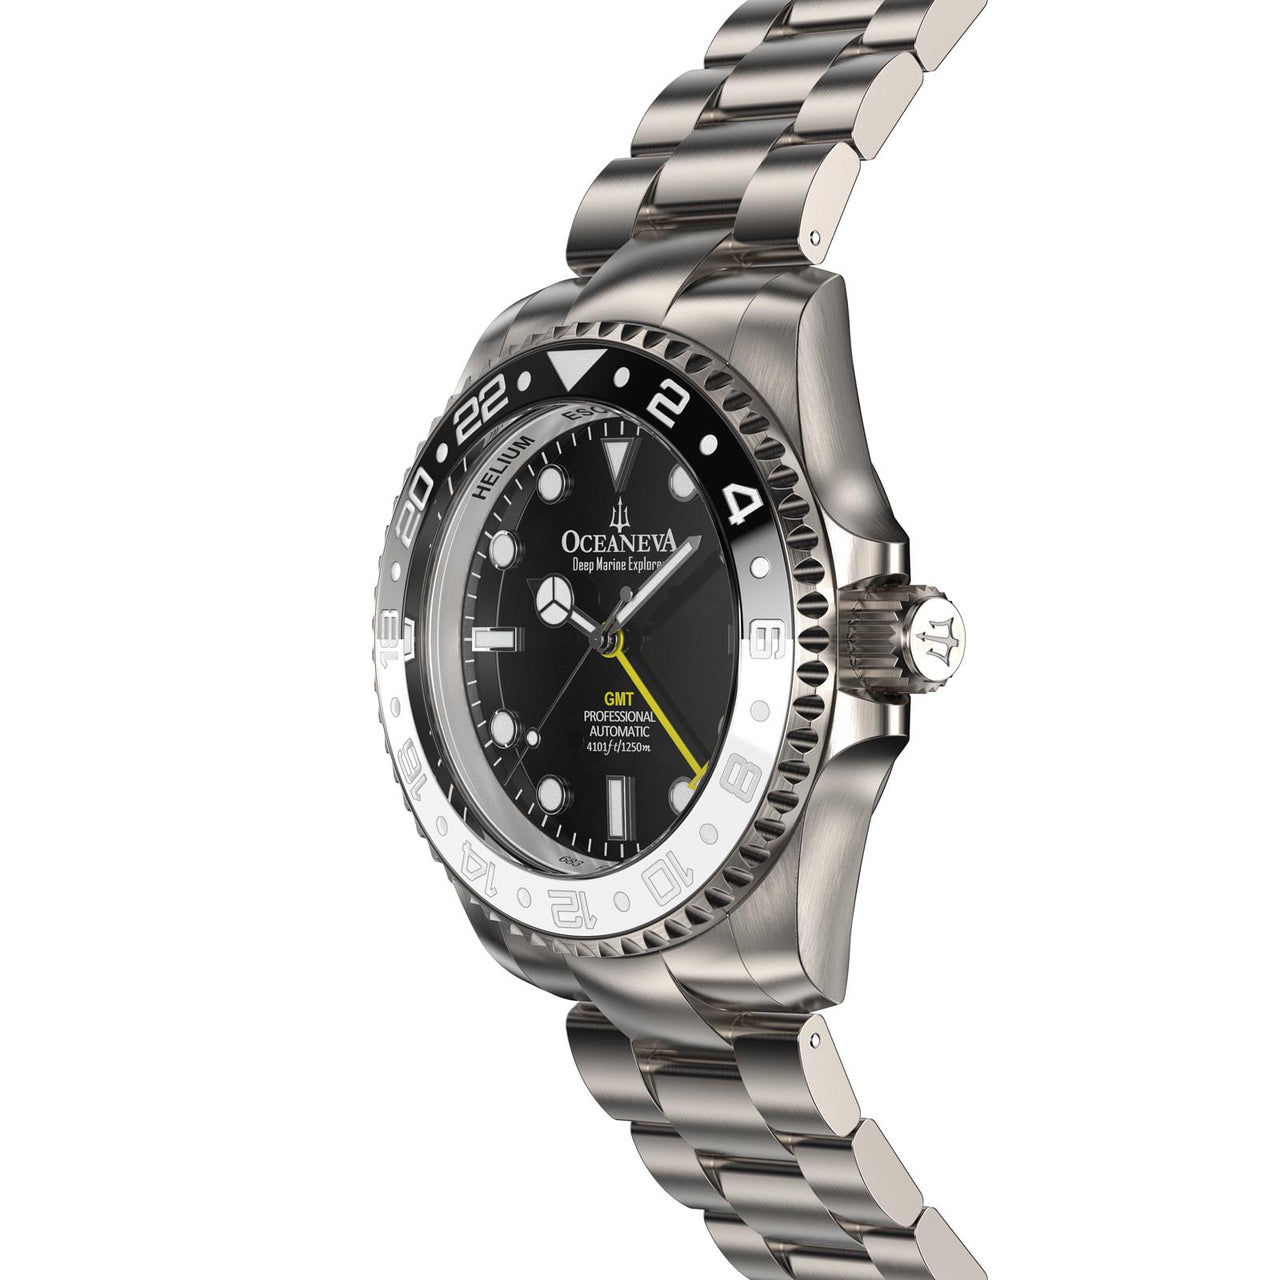 Oceaneva's trendsetting Titanium Watch with advanced mechanical features